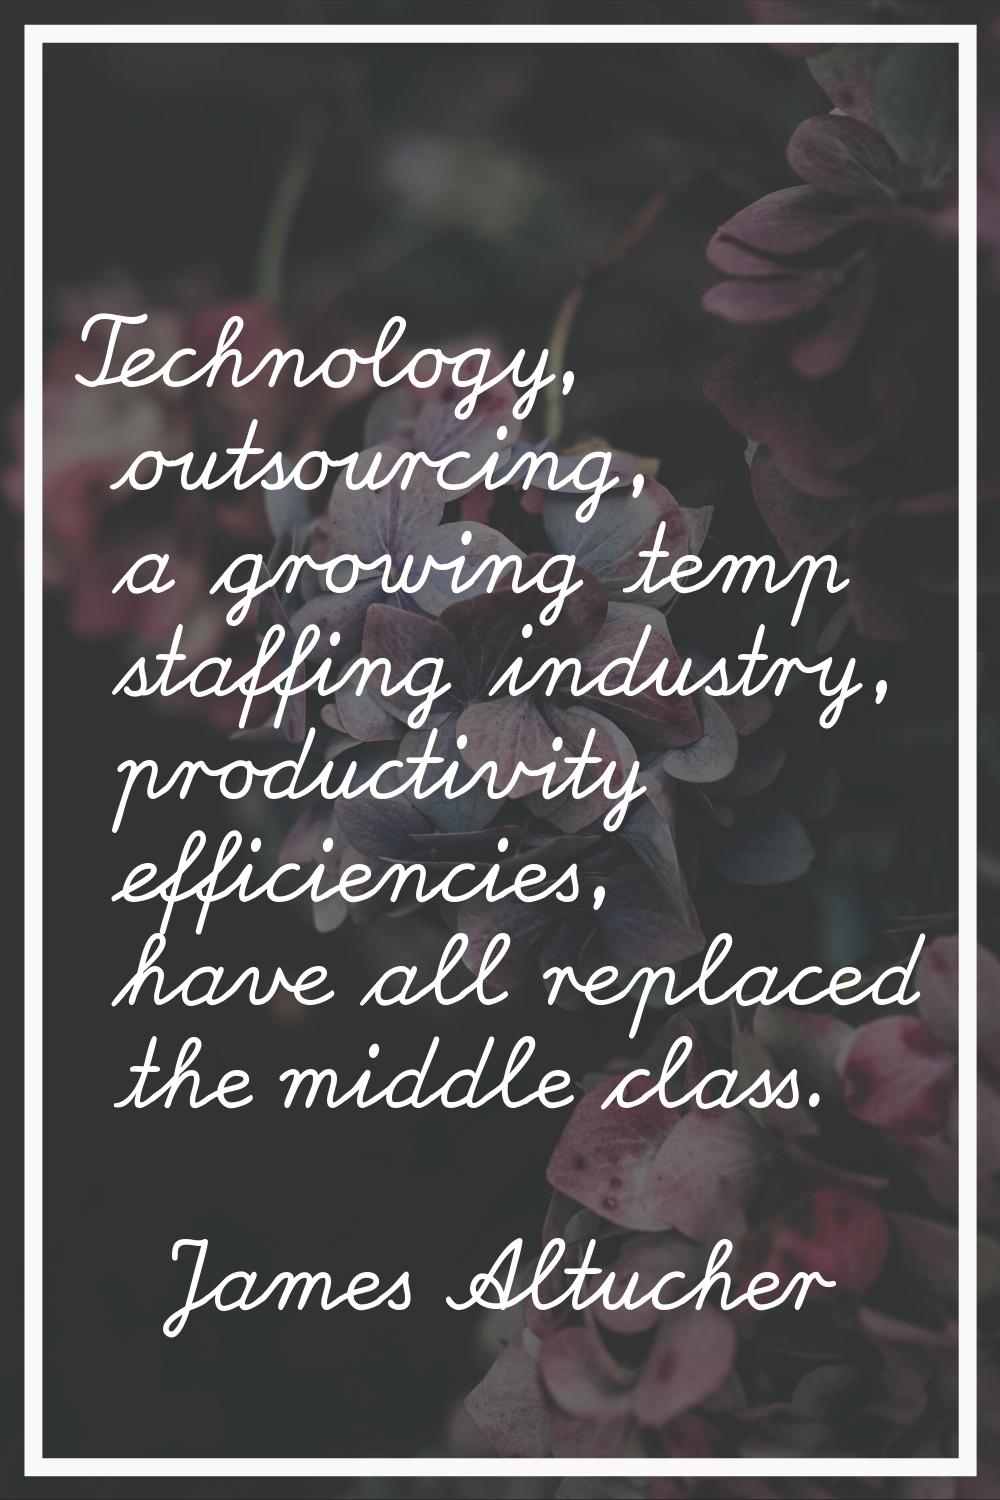 Technology, outsourcing, a growing temp staffing industry, productivity efficiencies, have all repl